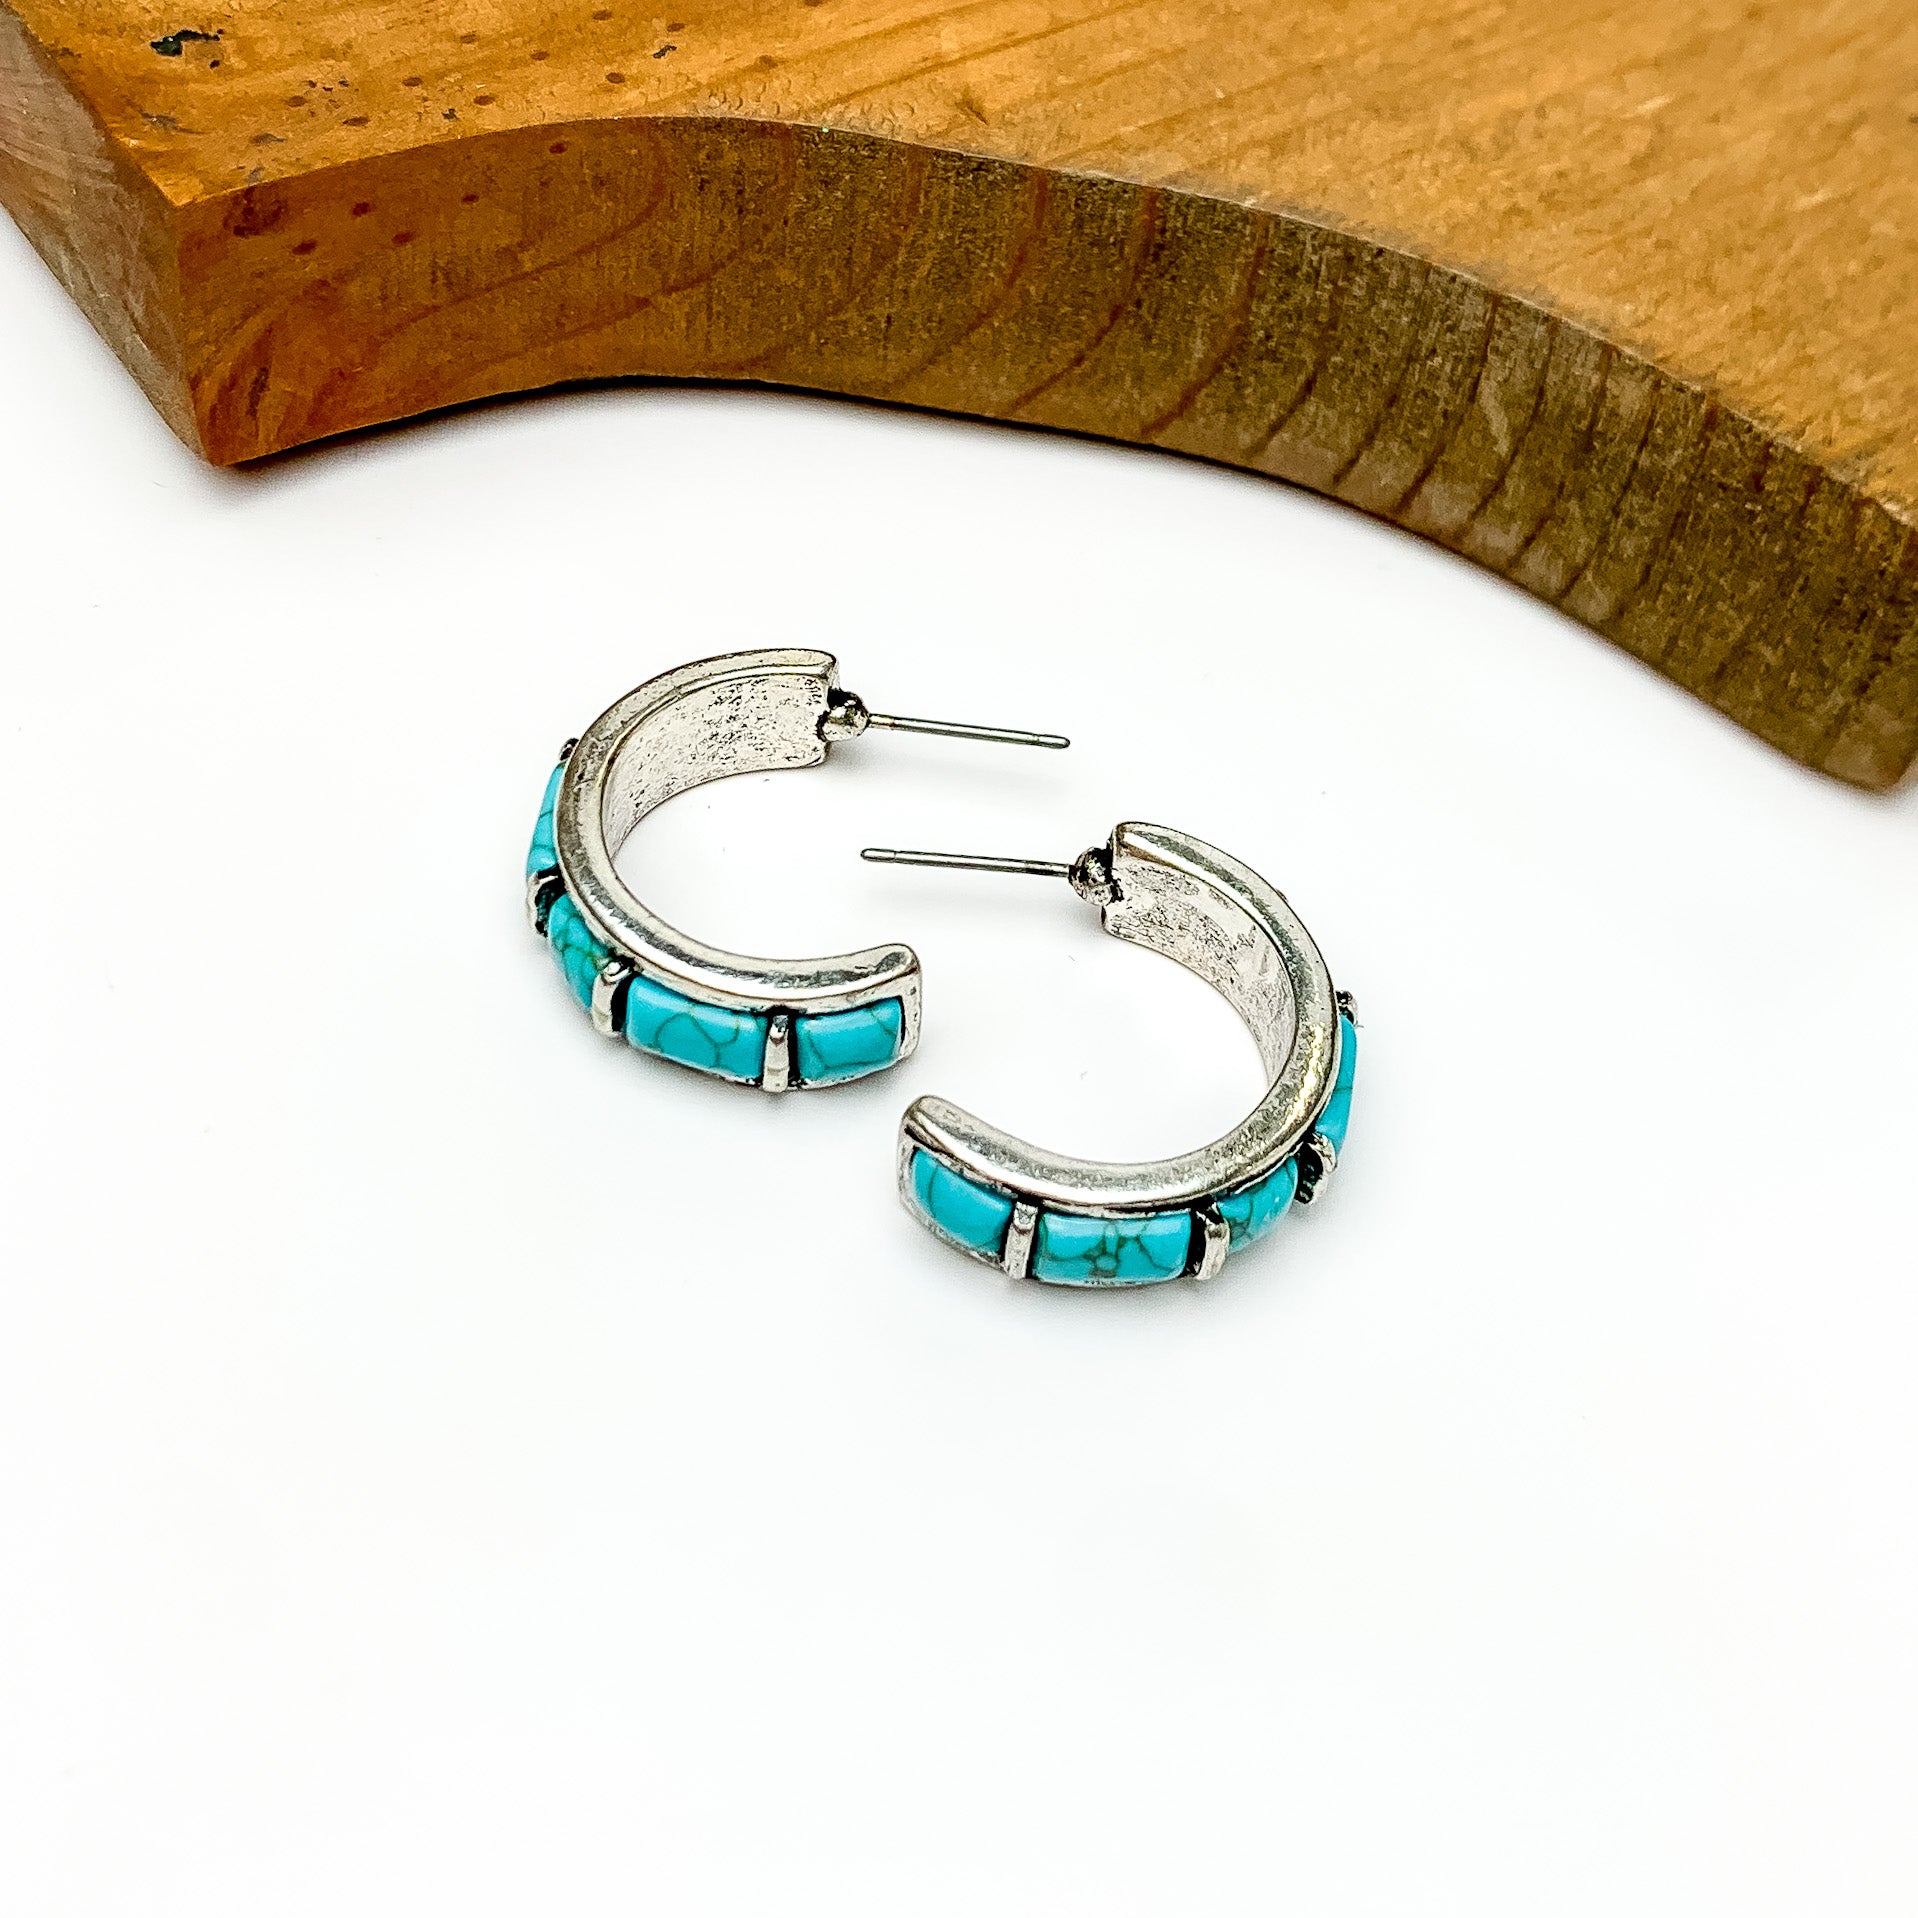 Turquois and silver tone medium size hoops. Pictured on a white background with a wood piece at the top